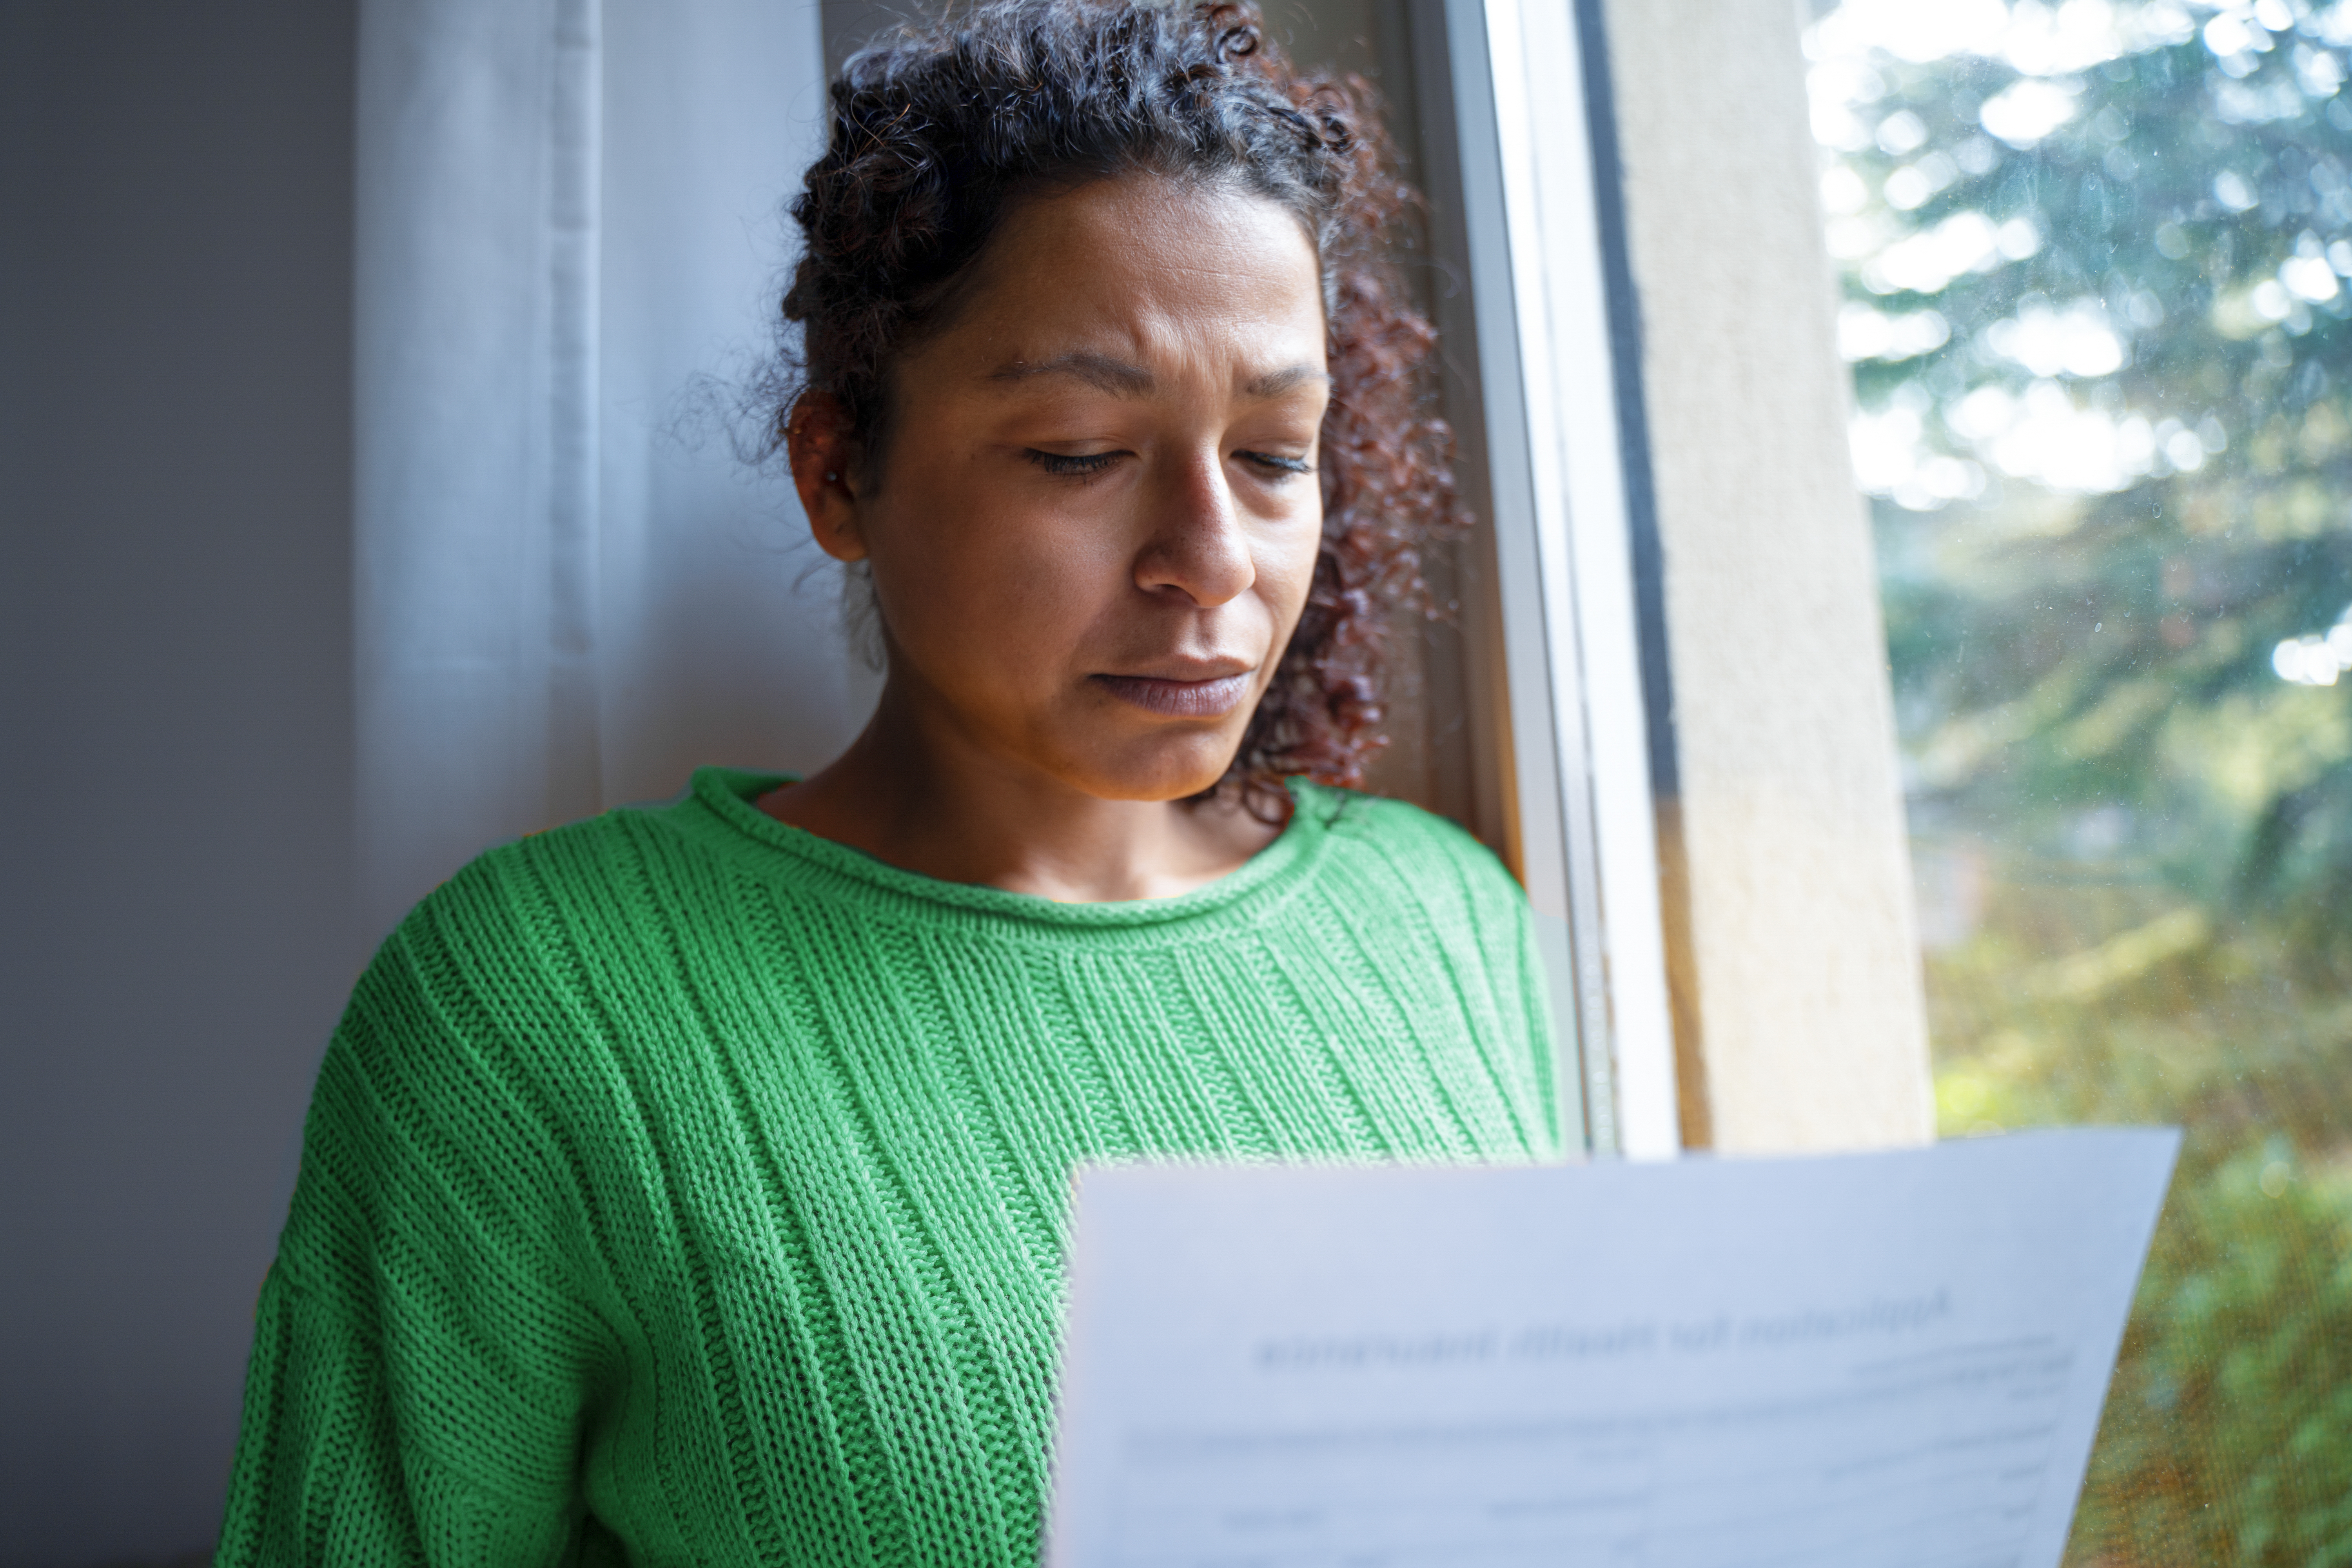 A middle-aged black woman getting bad news letter feeling worried